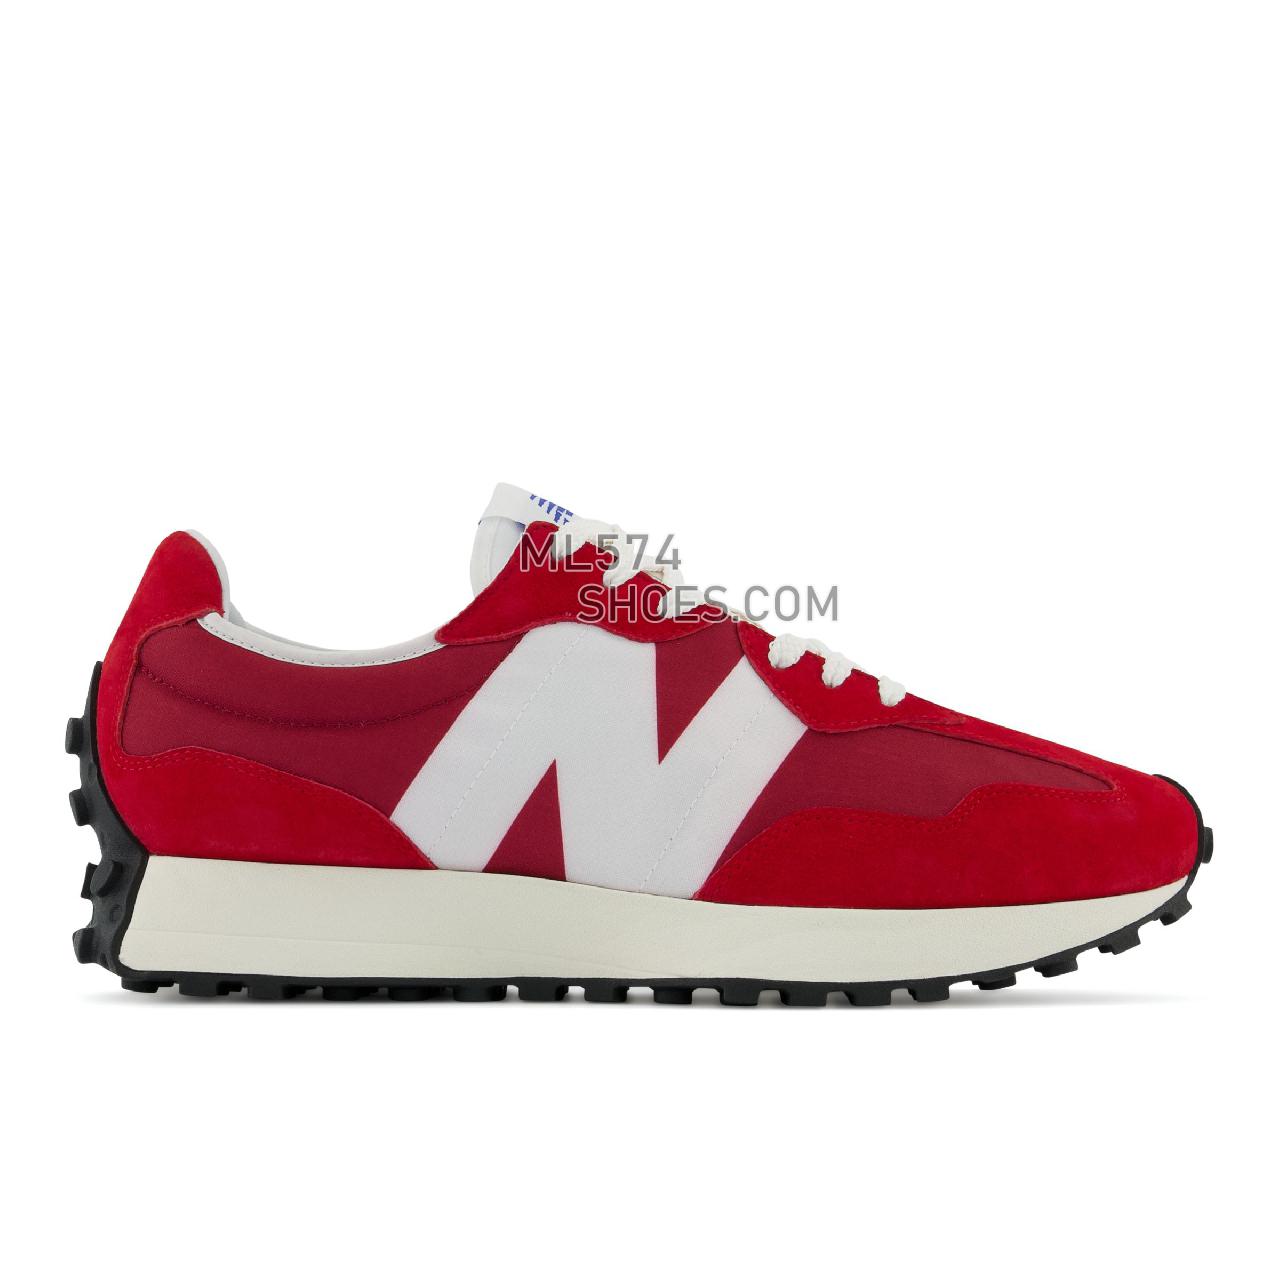 New Balance 327 - Men's Sport Style Sneakers - Nb Scarlet with Team Red - MS327LD1